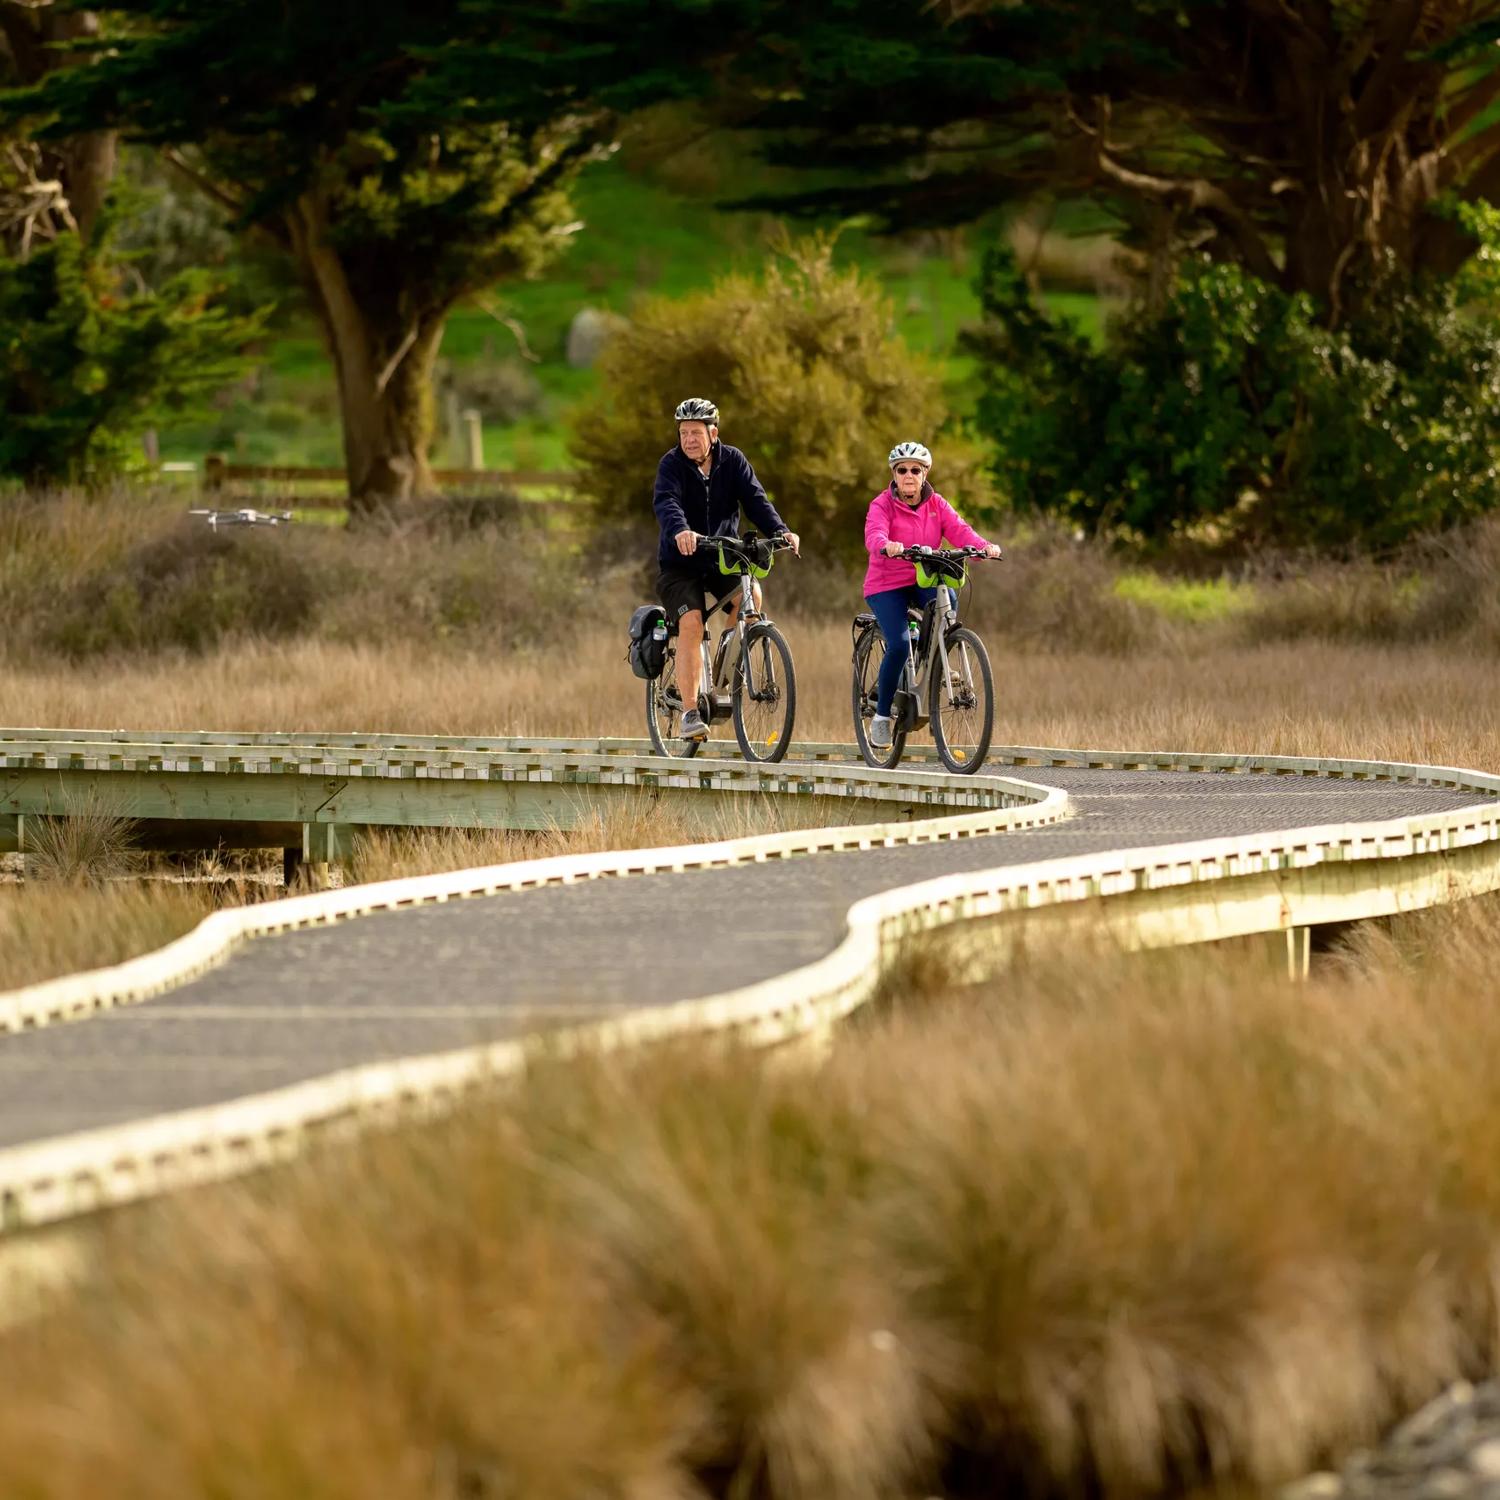 Two cyclists riding on an elevated wooden path in a nature reserve.